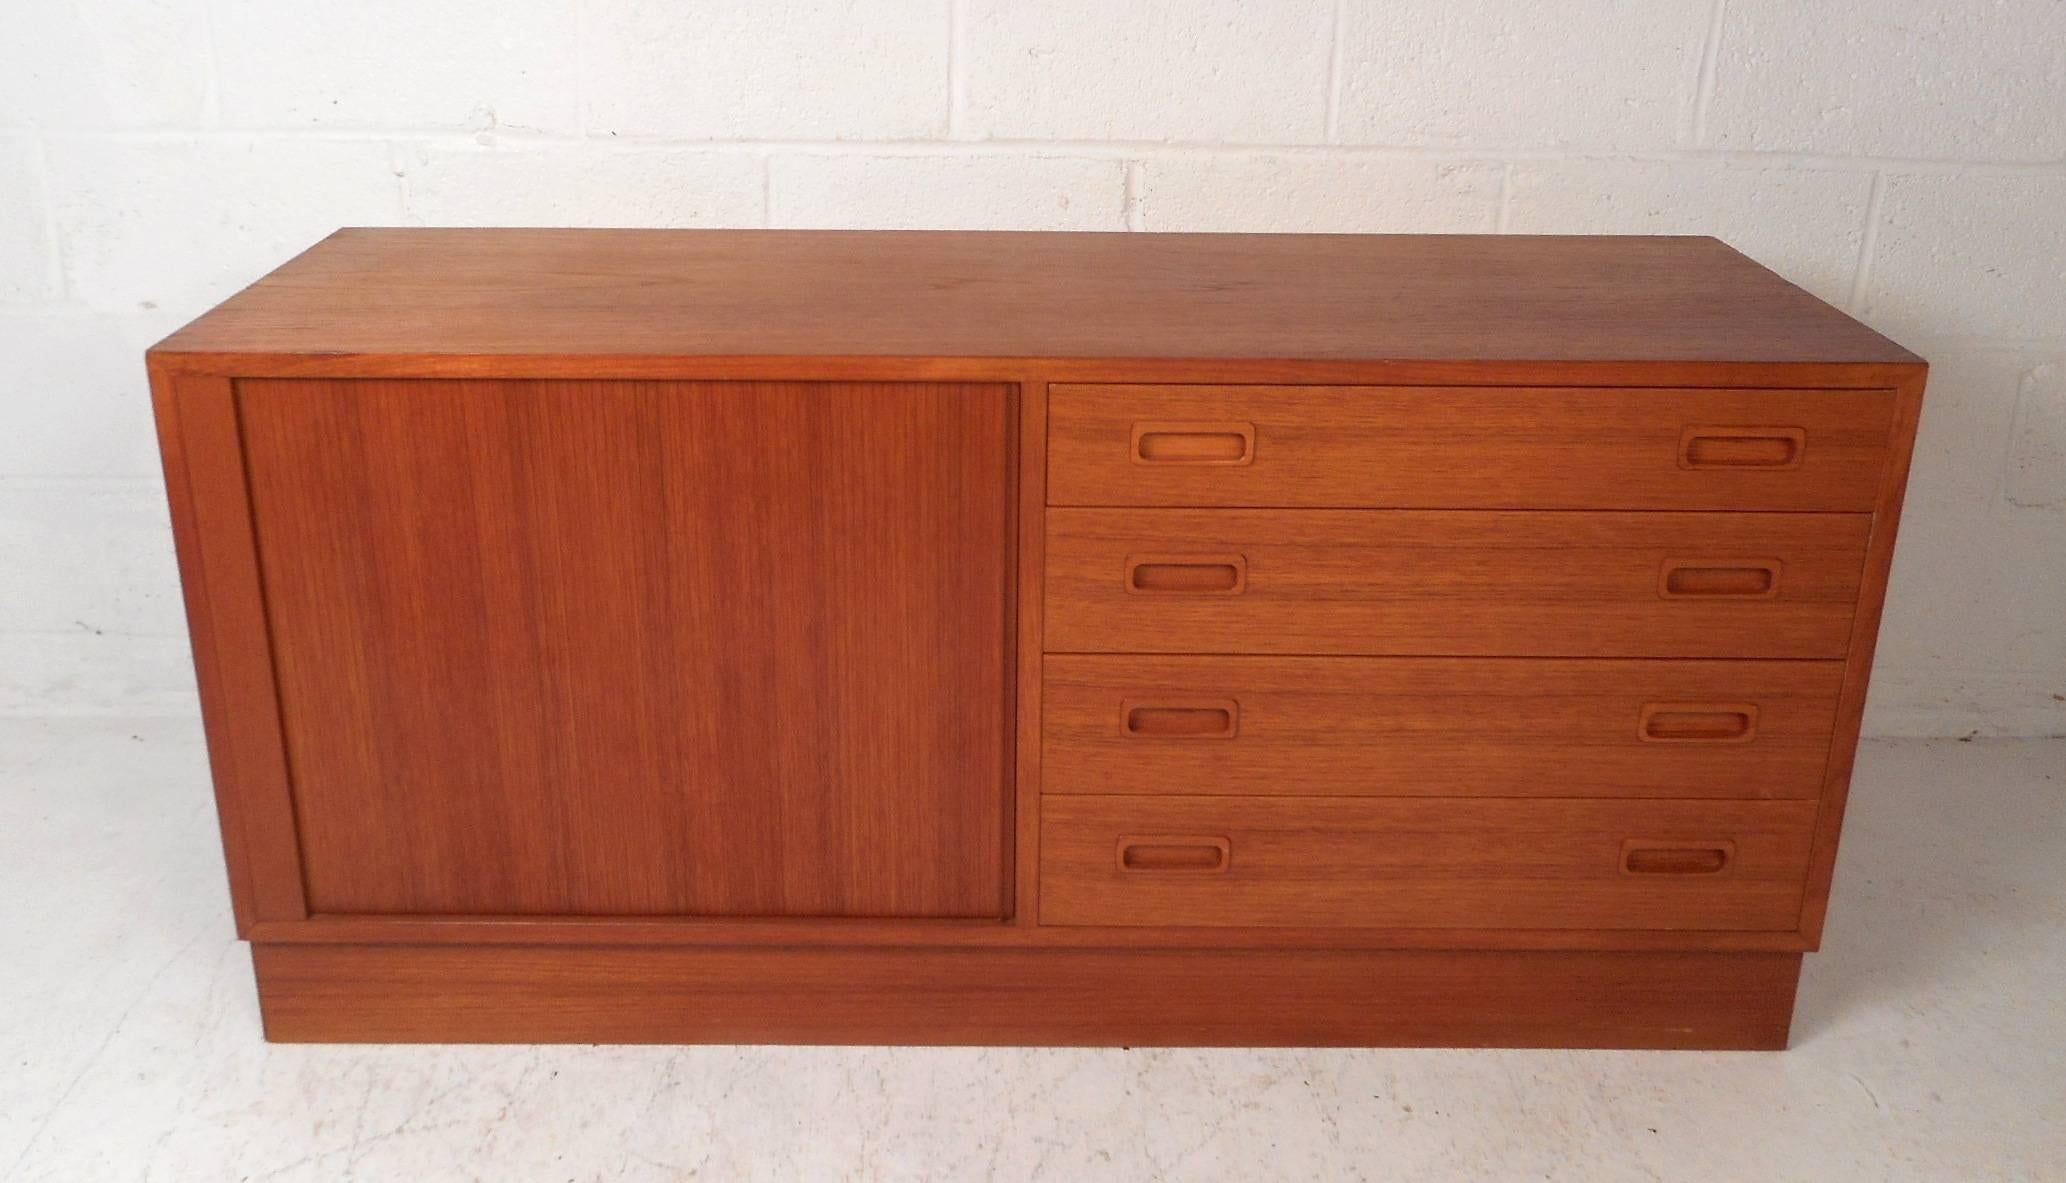 This beautiful vintage modern sideboard features a tambour door that hides a large compartment with two shelves and four large drawers. Sleek design with a blonde colored interior and an elegant teak wood grain throughout. Quality craftsmanship with